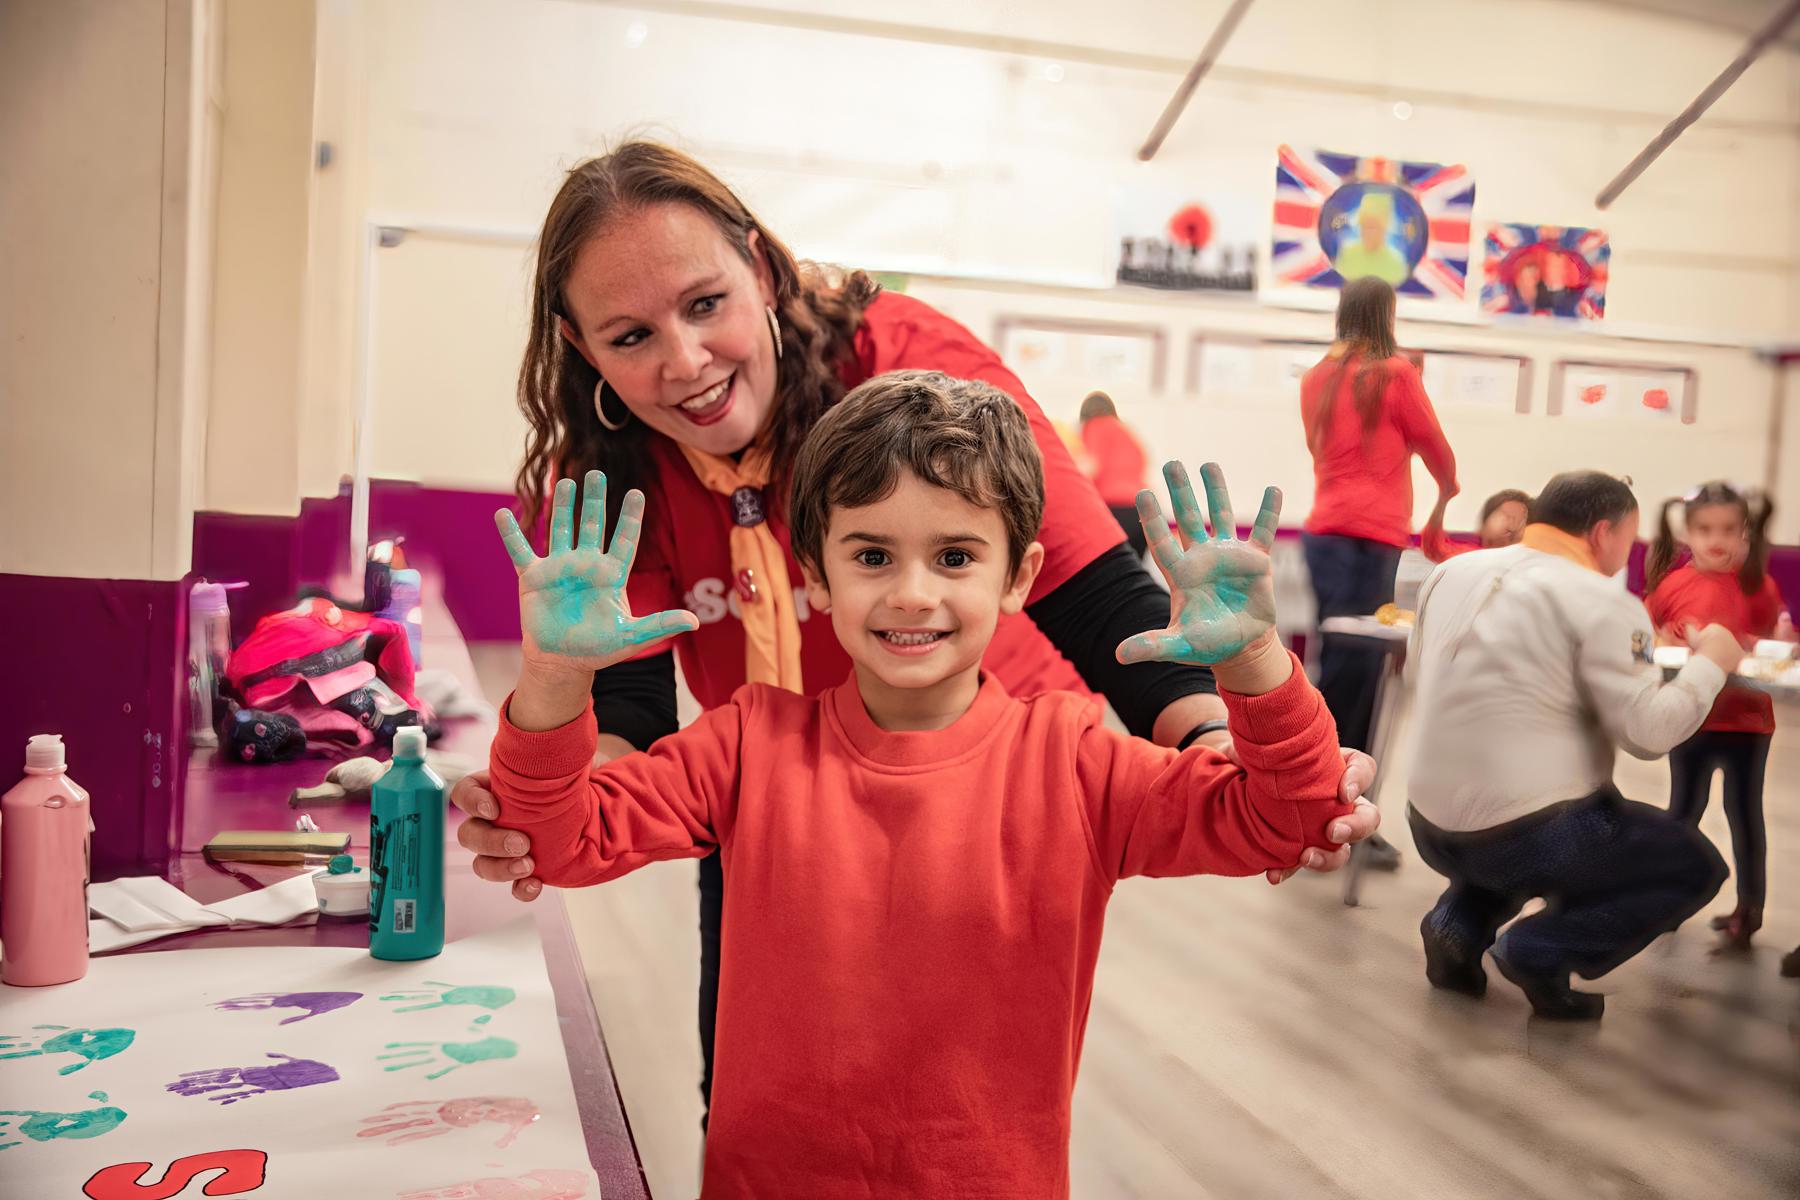 A boy Squirrel is looking at the camera smiling, with both hands held up in the air. His hands are covered in green paint and he has been making handprint pictures. A female volunteer is stood behind him, smiling. They are inside their meeting place.